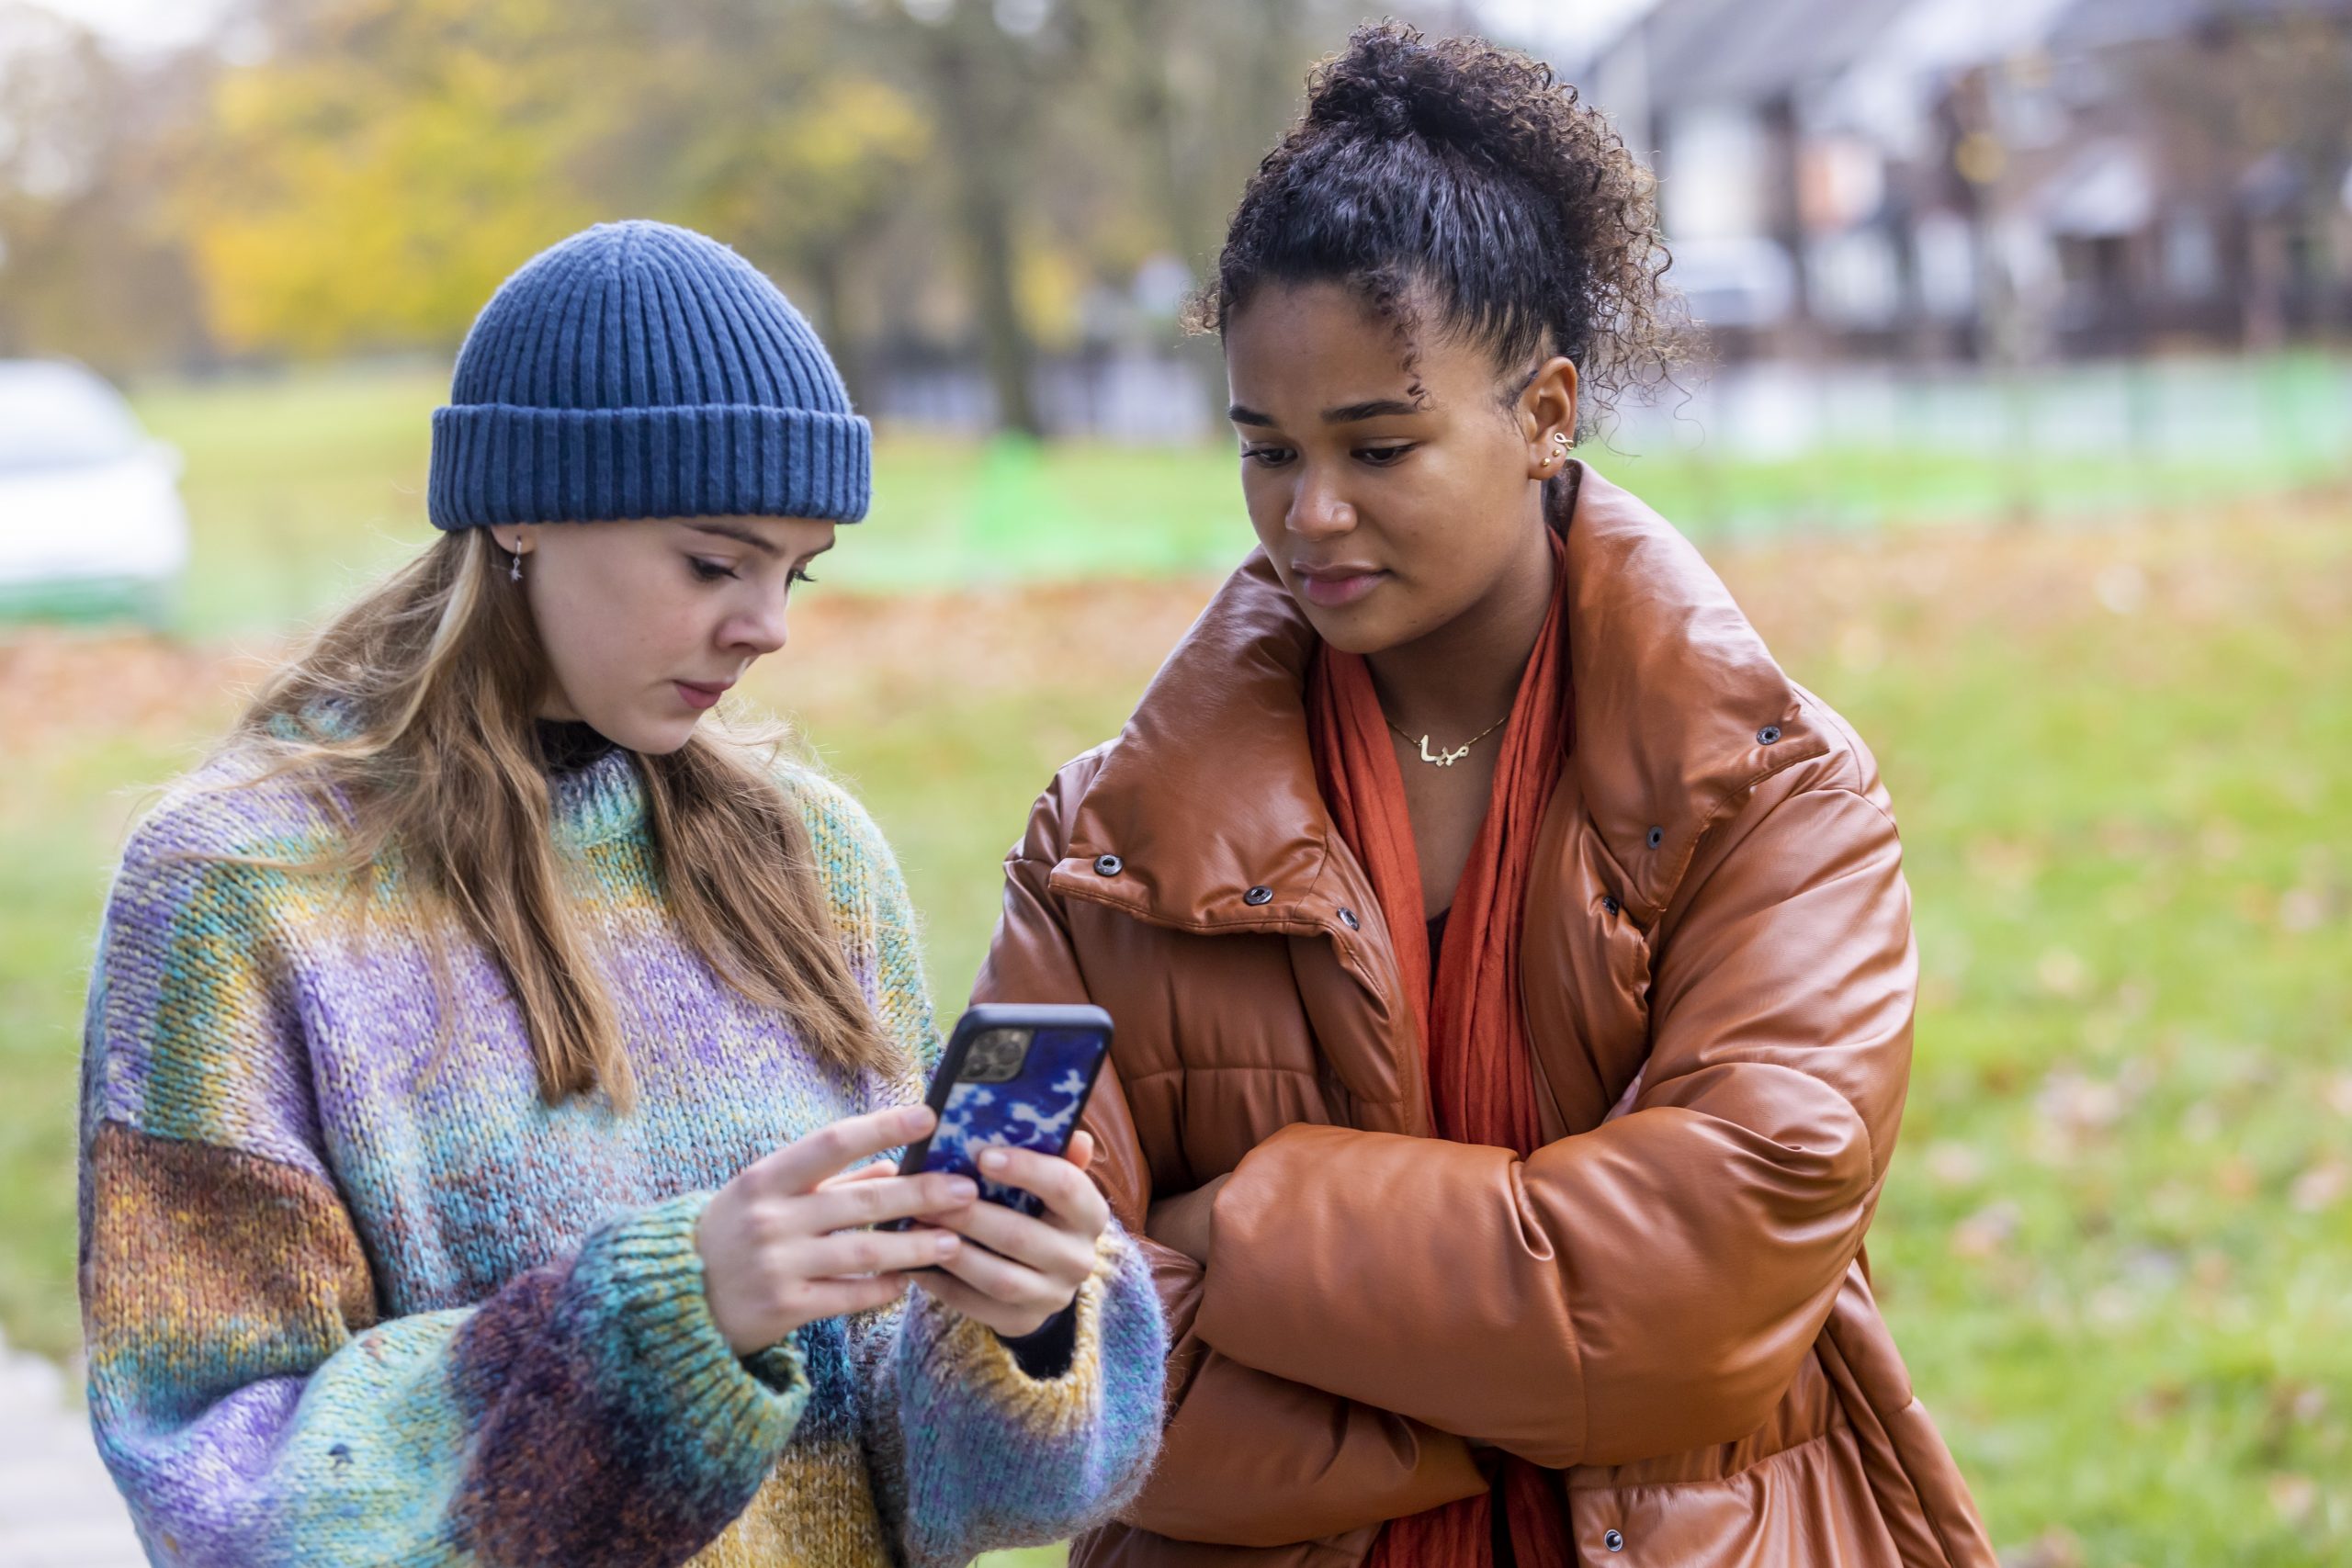 Two young people are standing outside in a field googling "What is labiaplasty?" on a phone